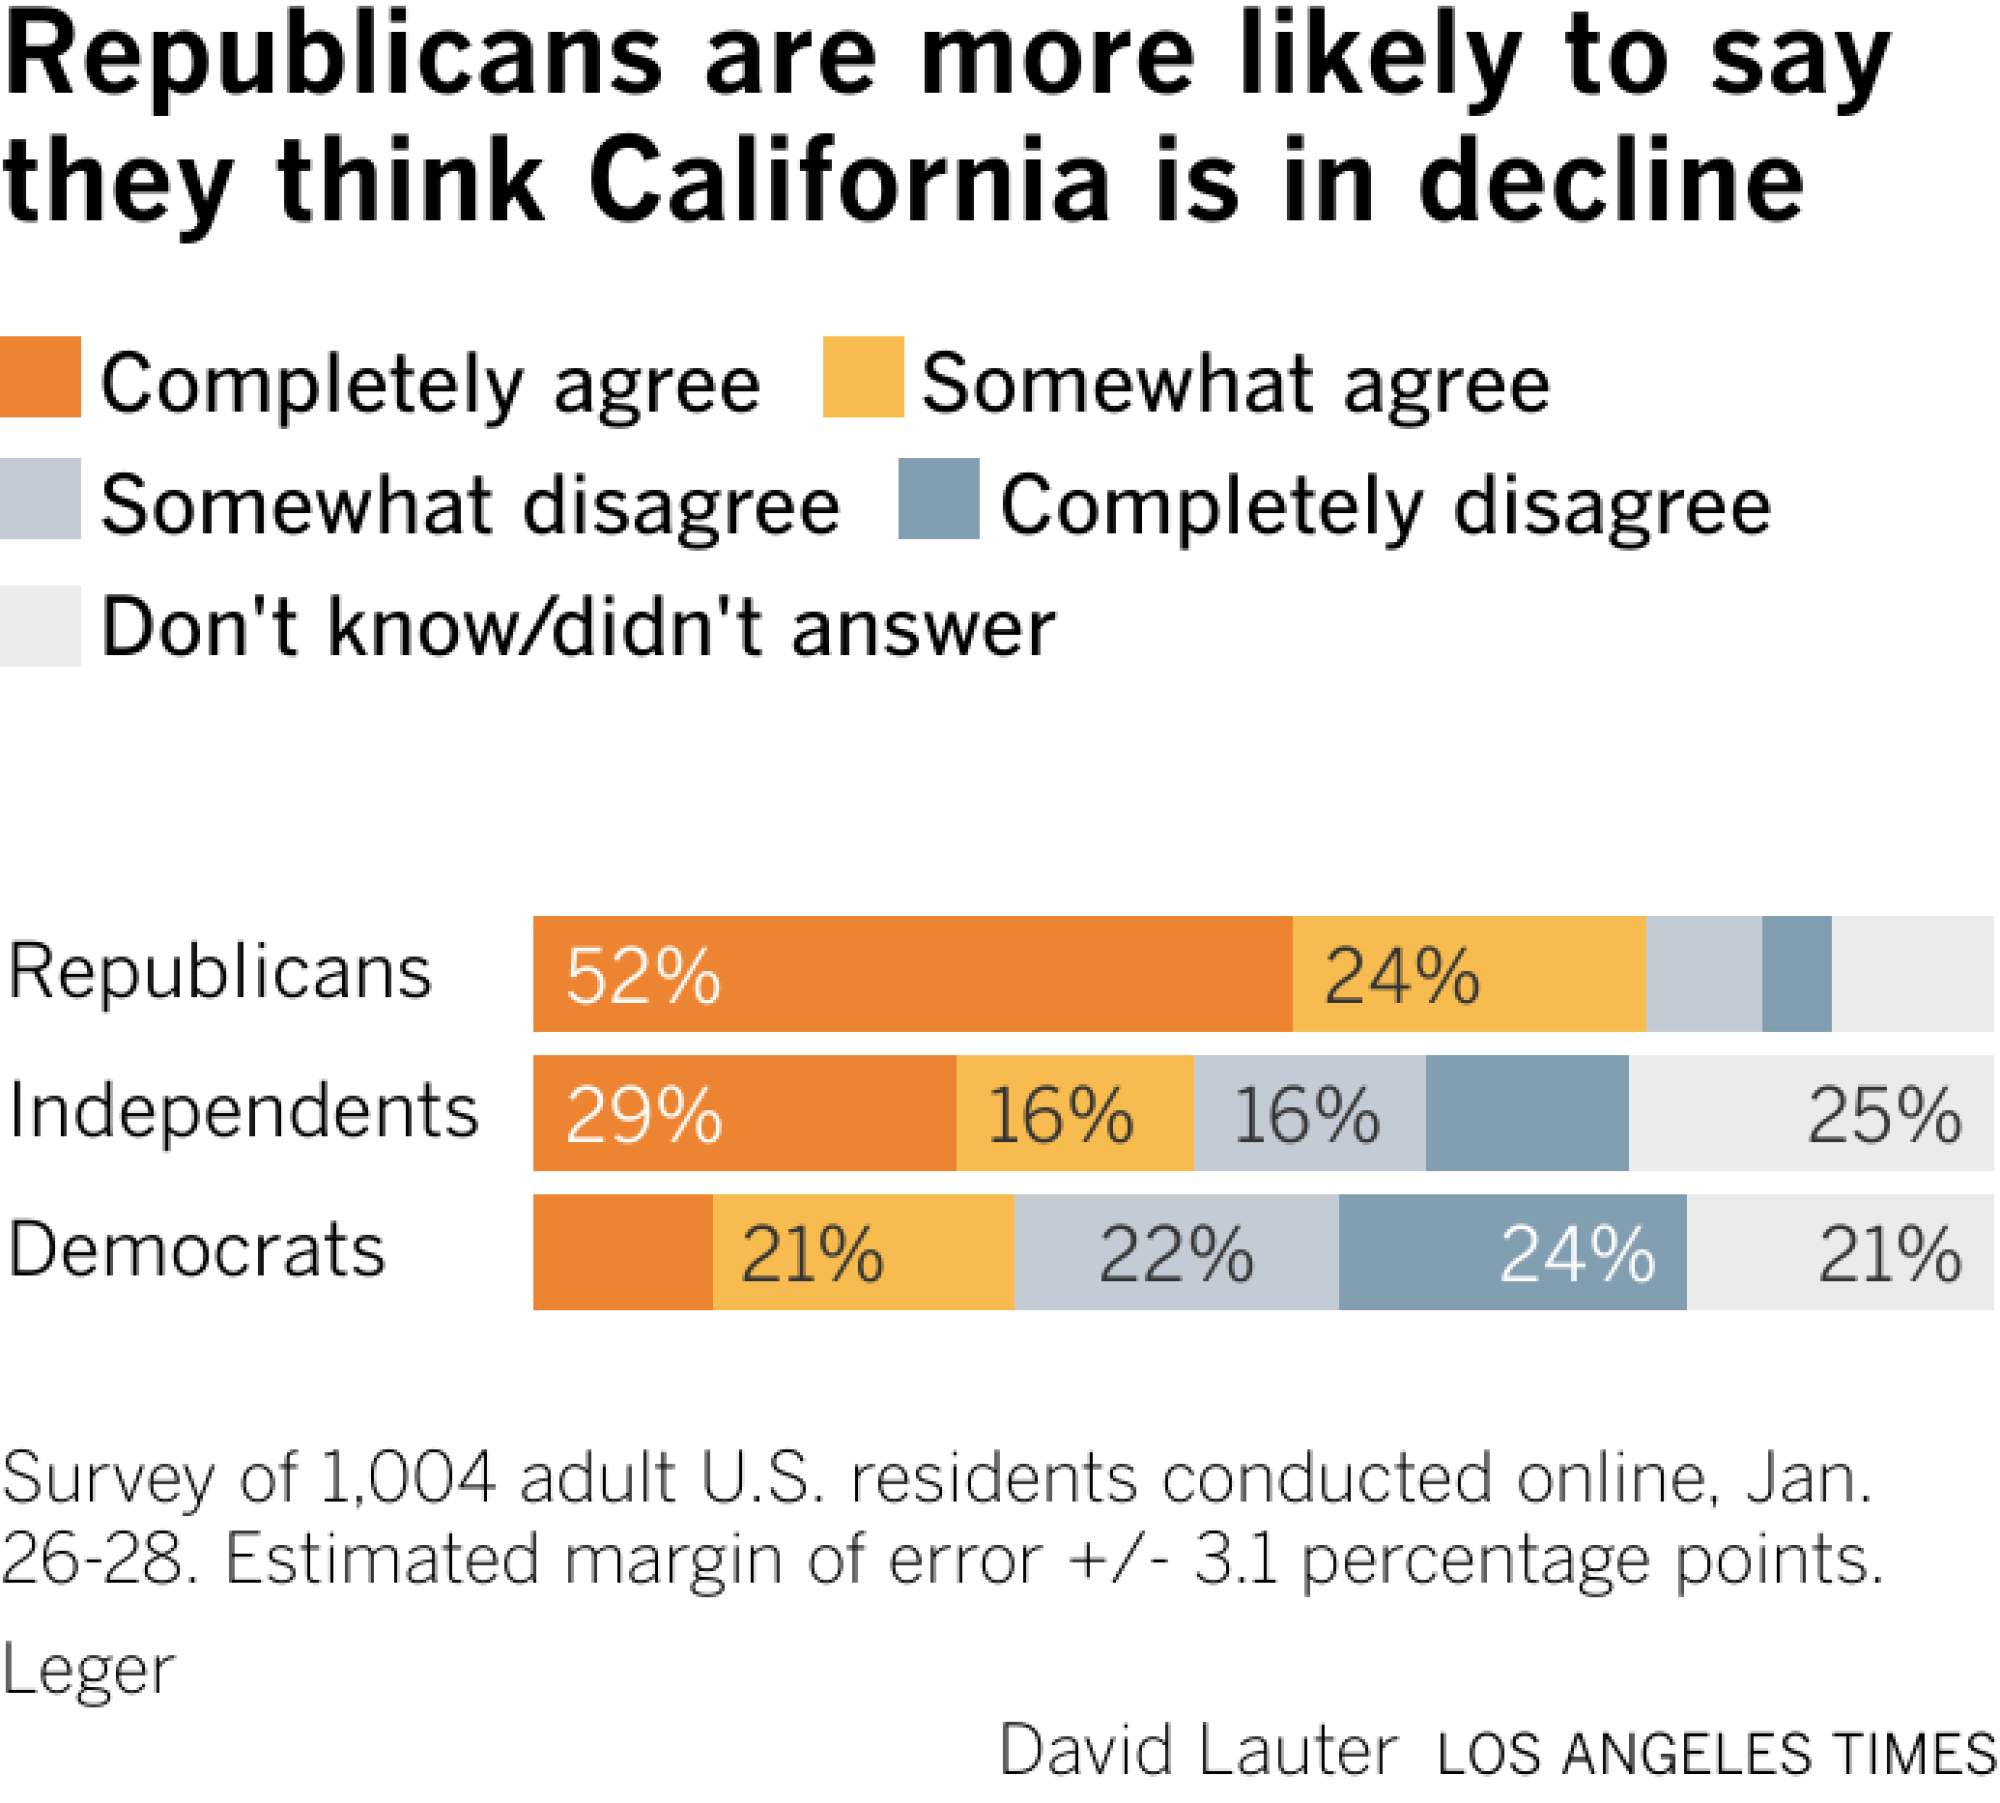 Bar chart shows the share of Republicans, independents and Democrats who either completely agree, somewhat agree, somewhat disagree or completely disagree that California is in decline.